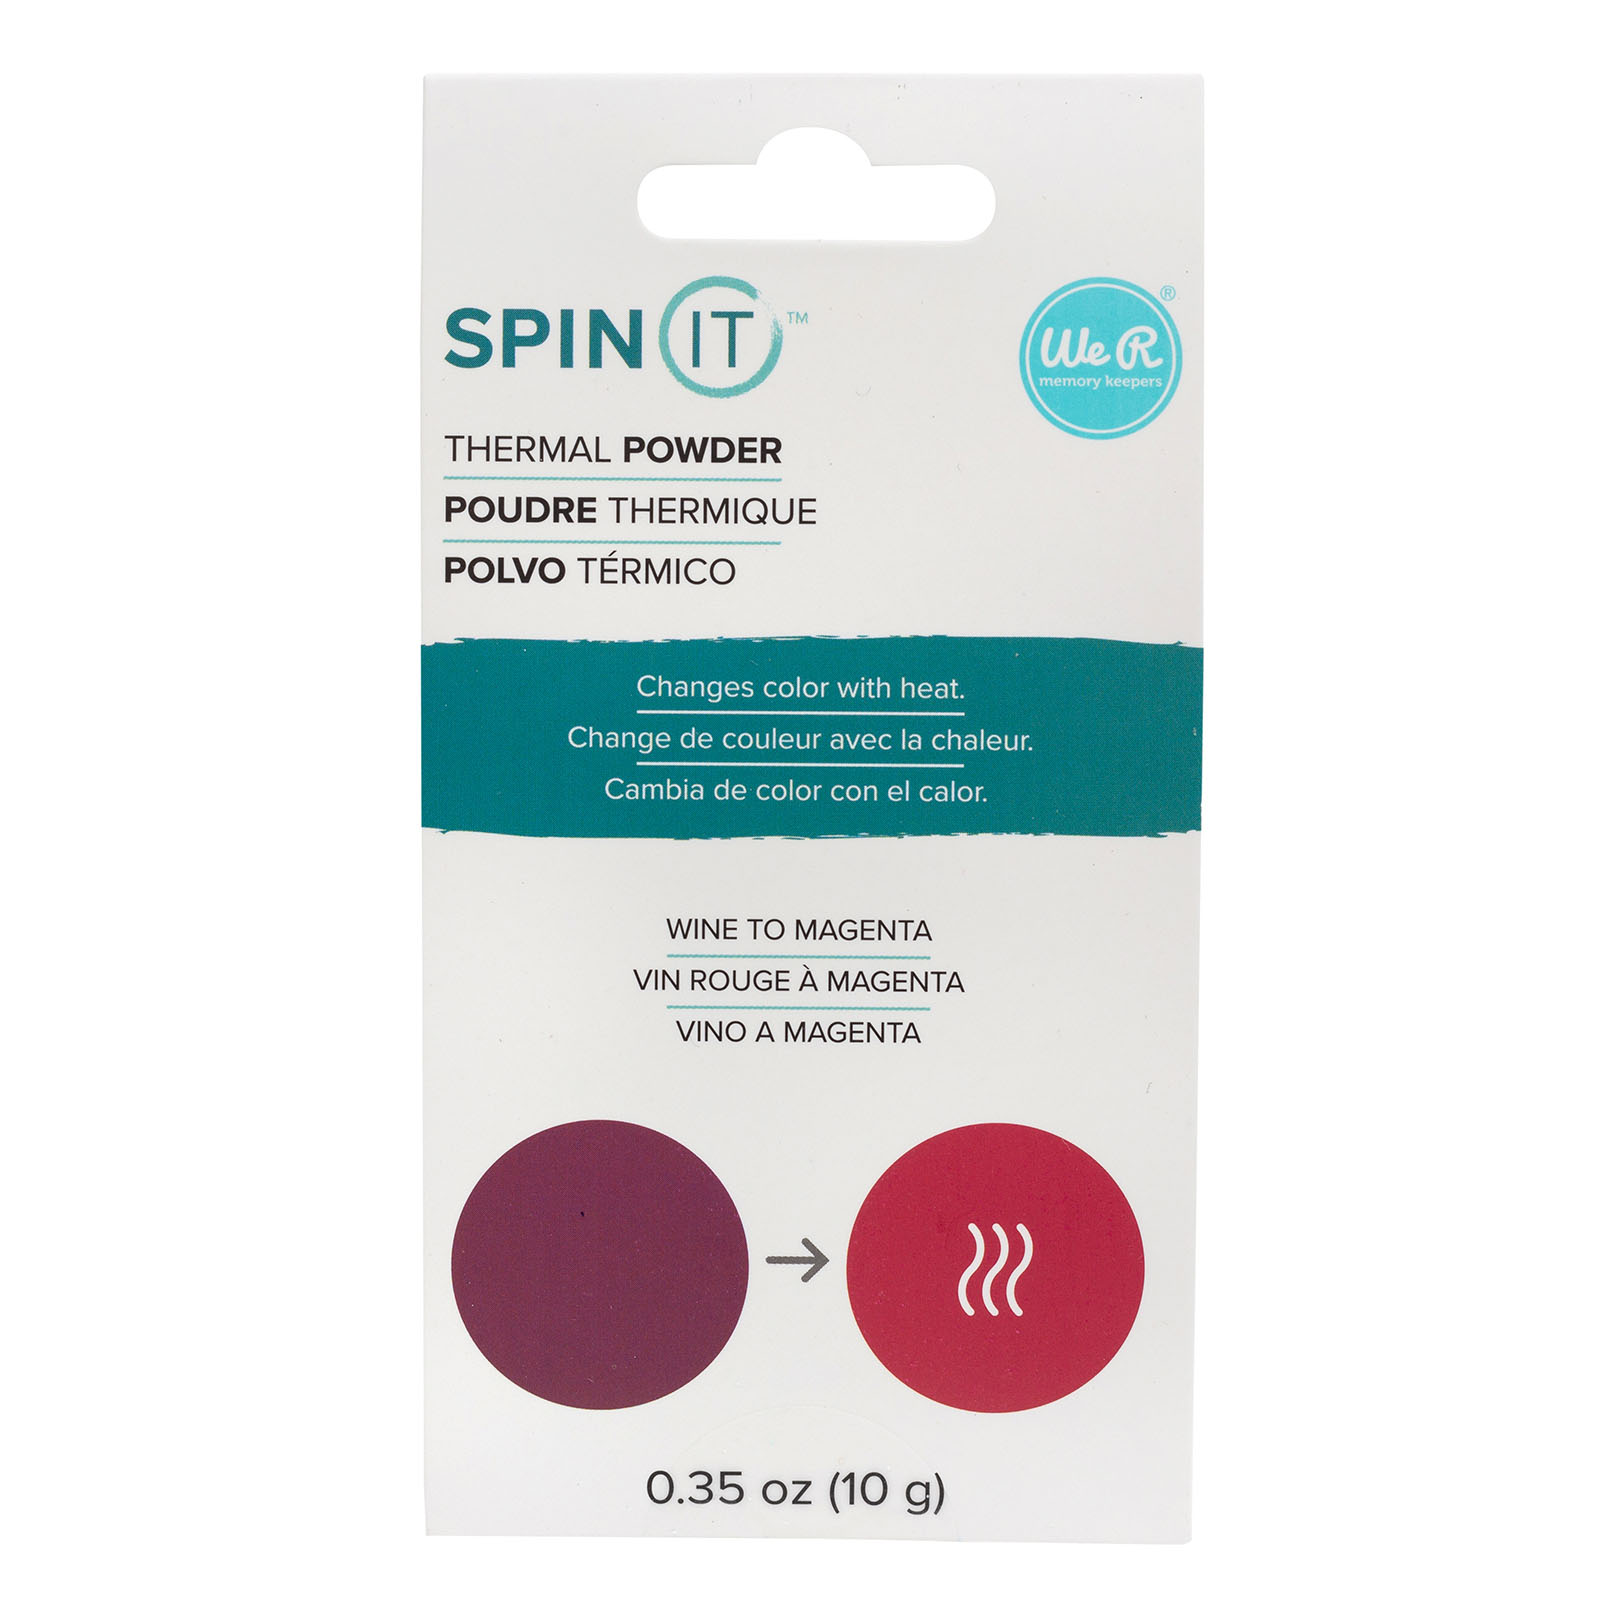 We R Makers • Spin IT thermal powder Wine to Magenta